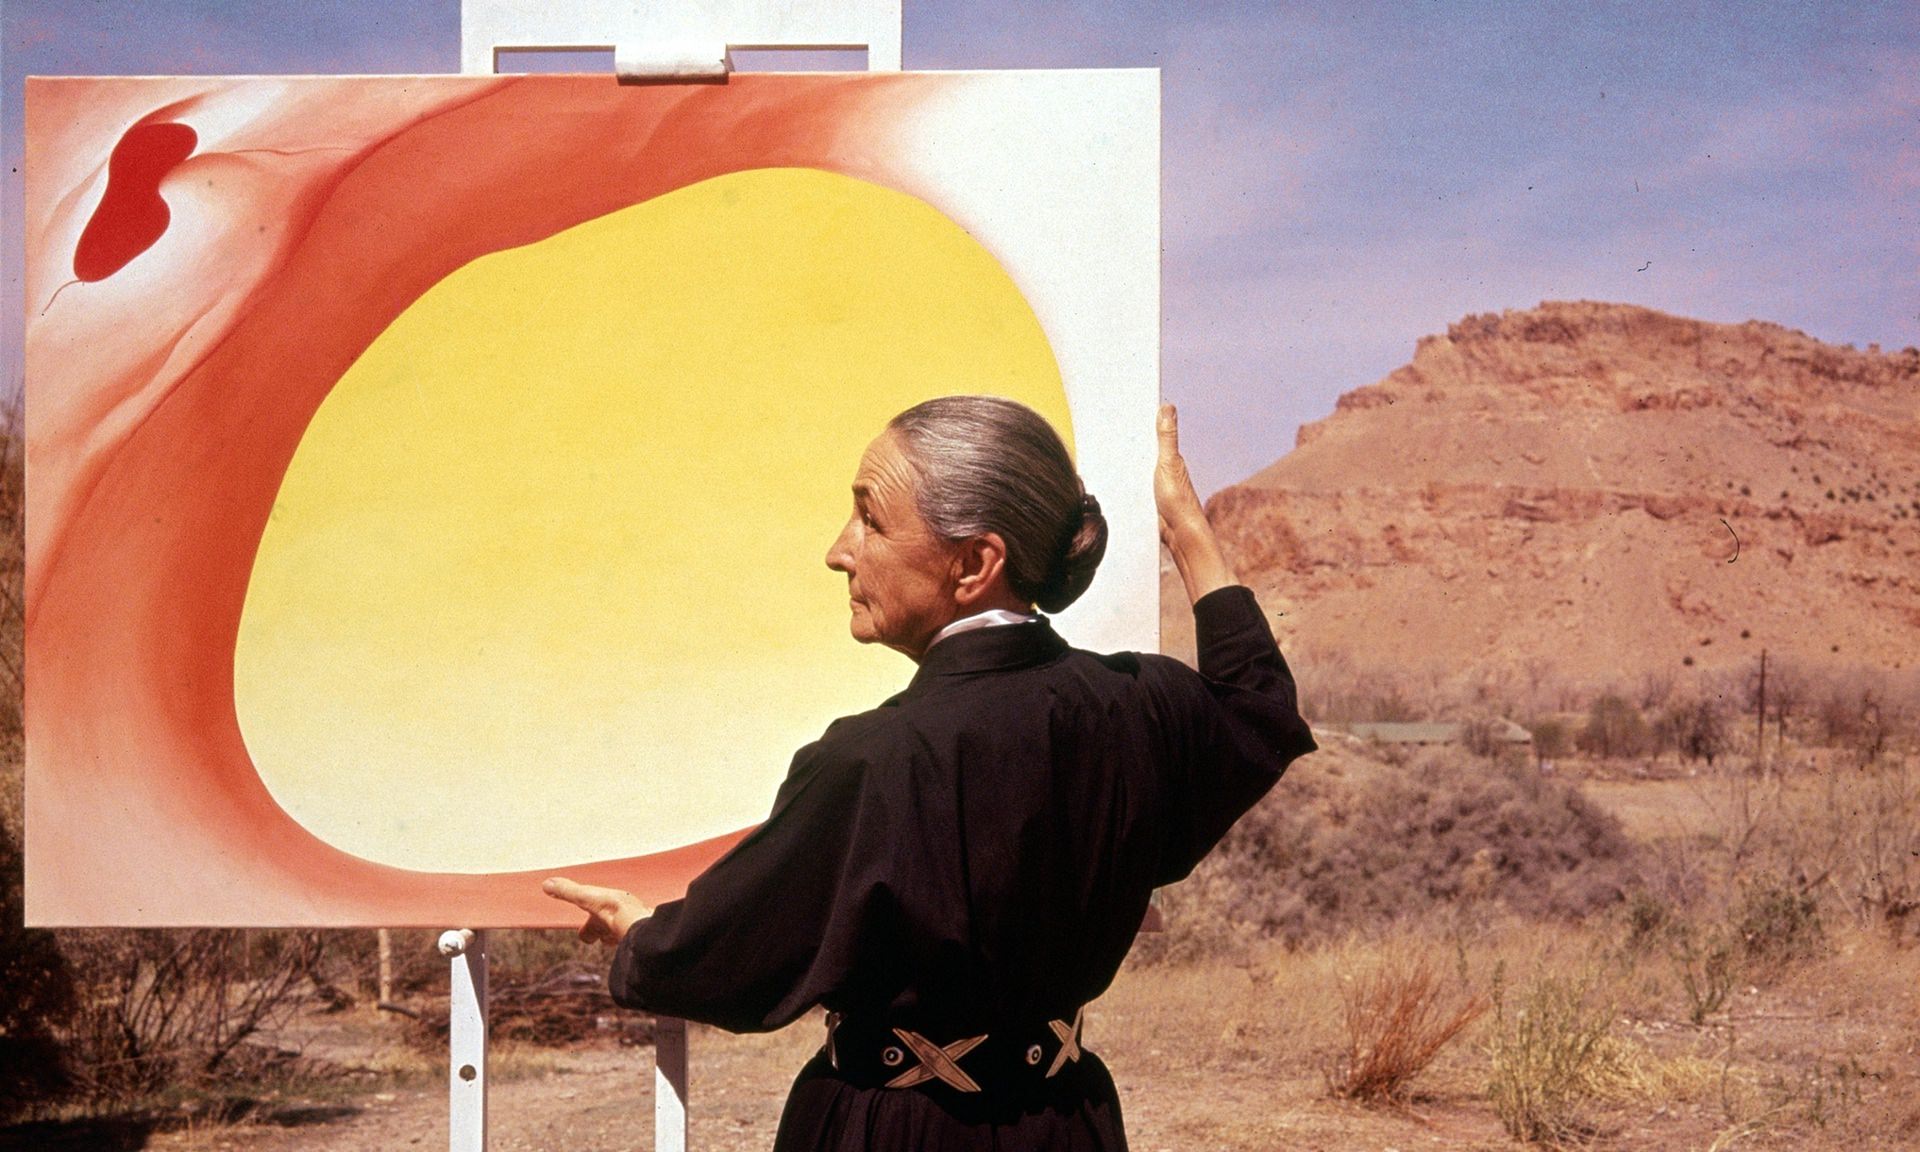 Georgia O’Keeffe adjusts a canvas from her Pelvis Series - Red With Yellow, in Albuquerque, New Mexico, in 1960. Photograph Tony Vaccaro-Getty Images.